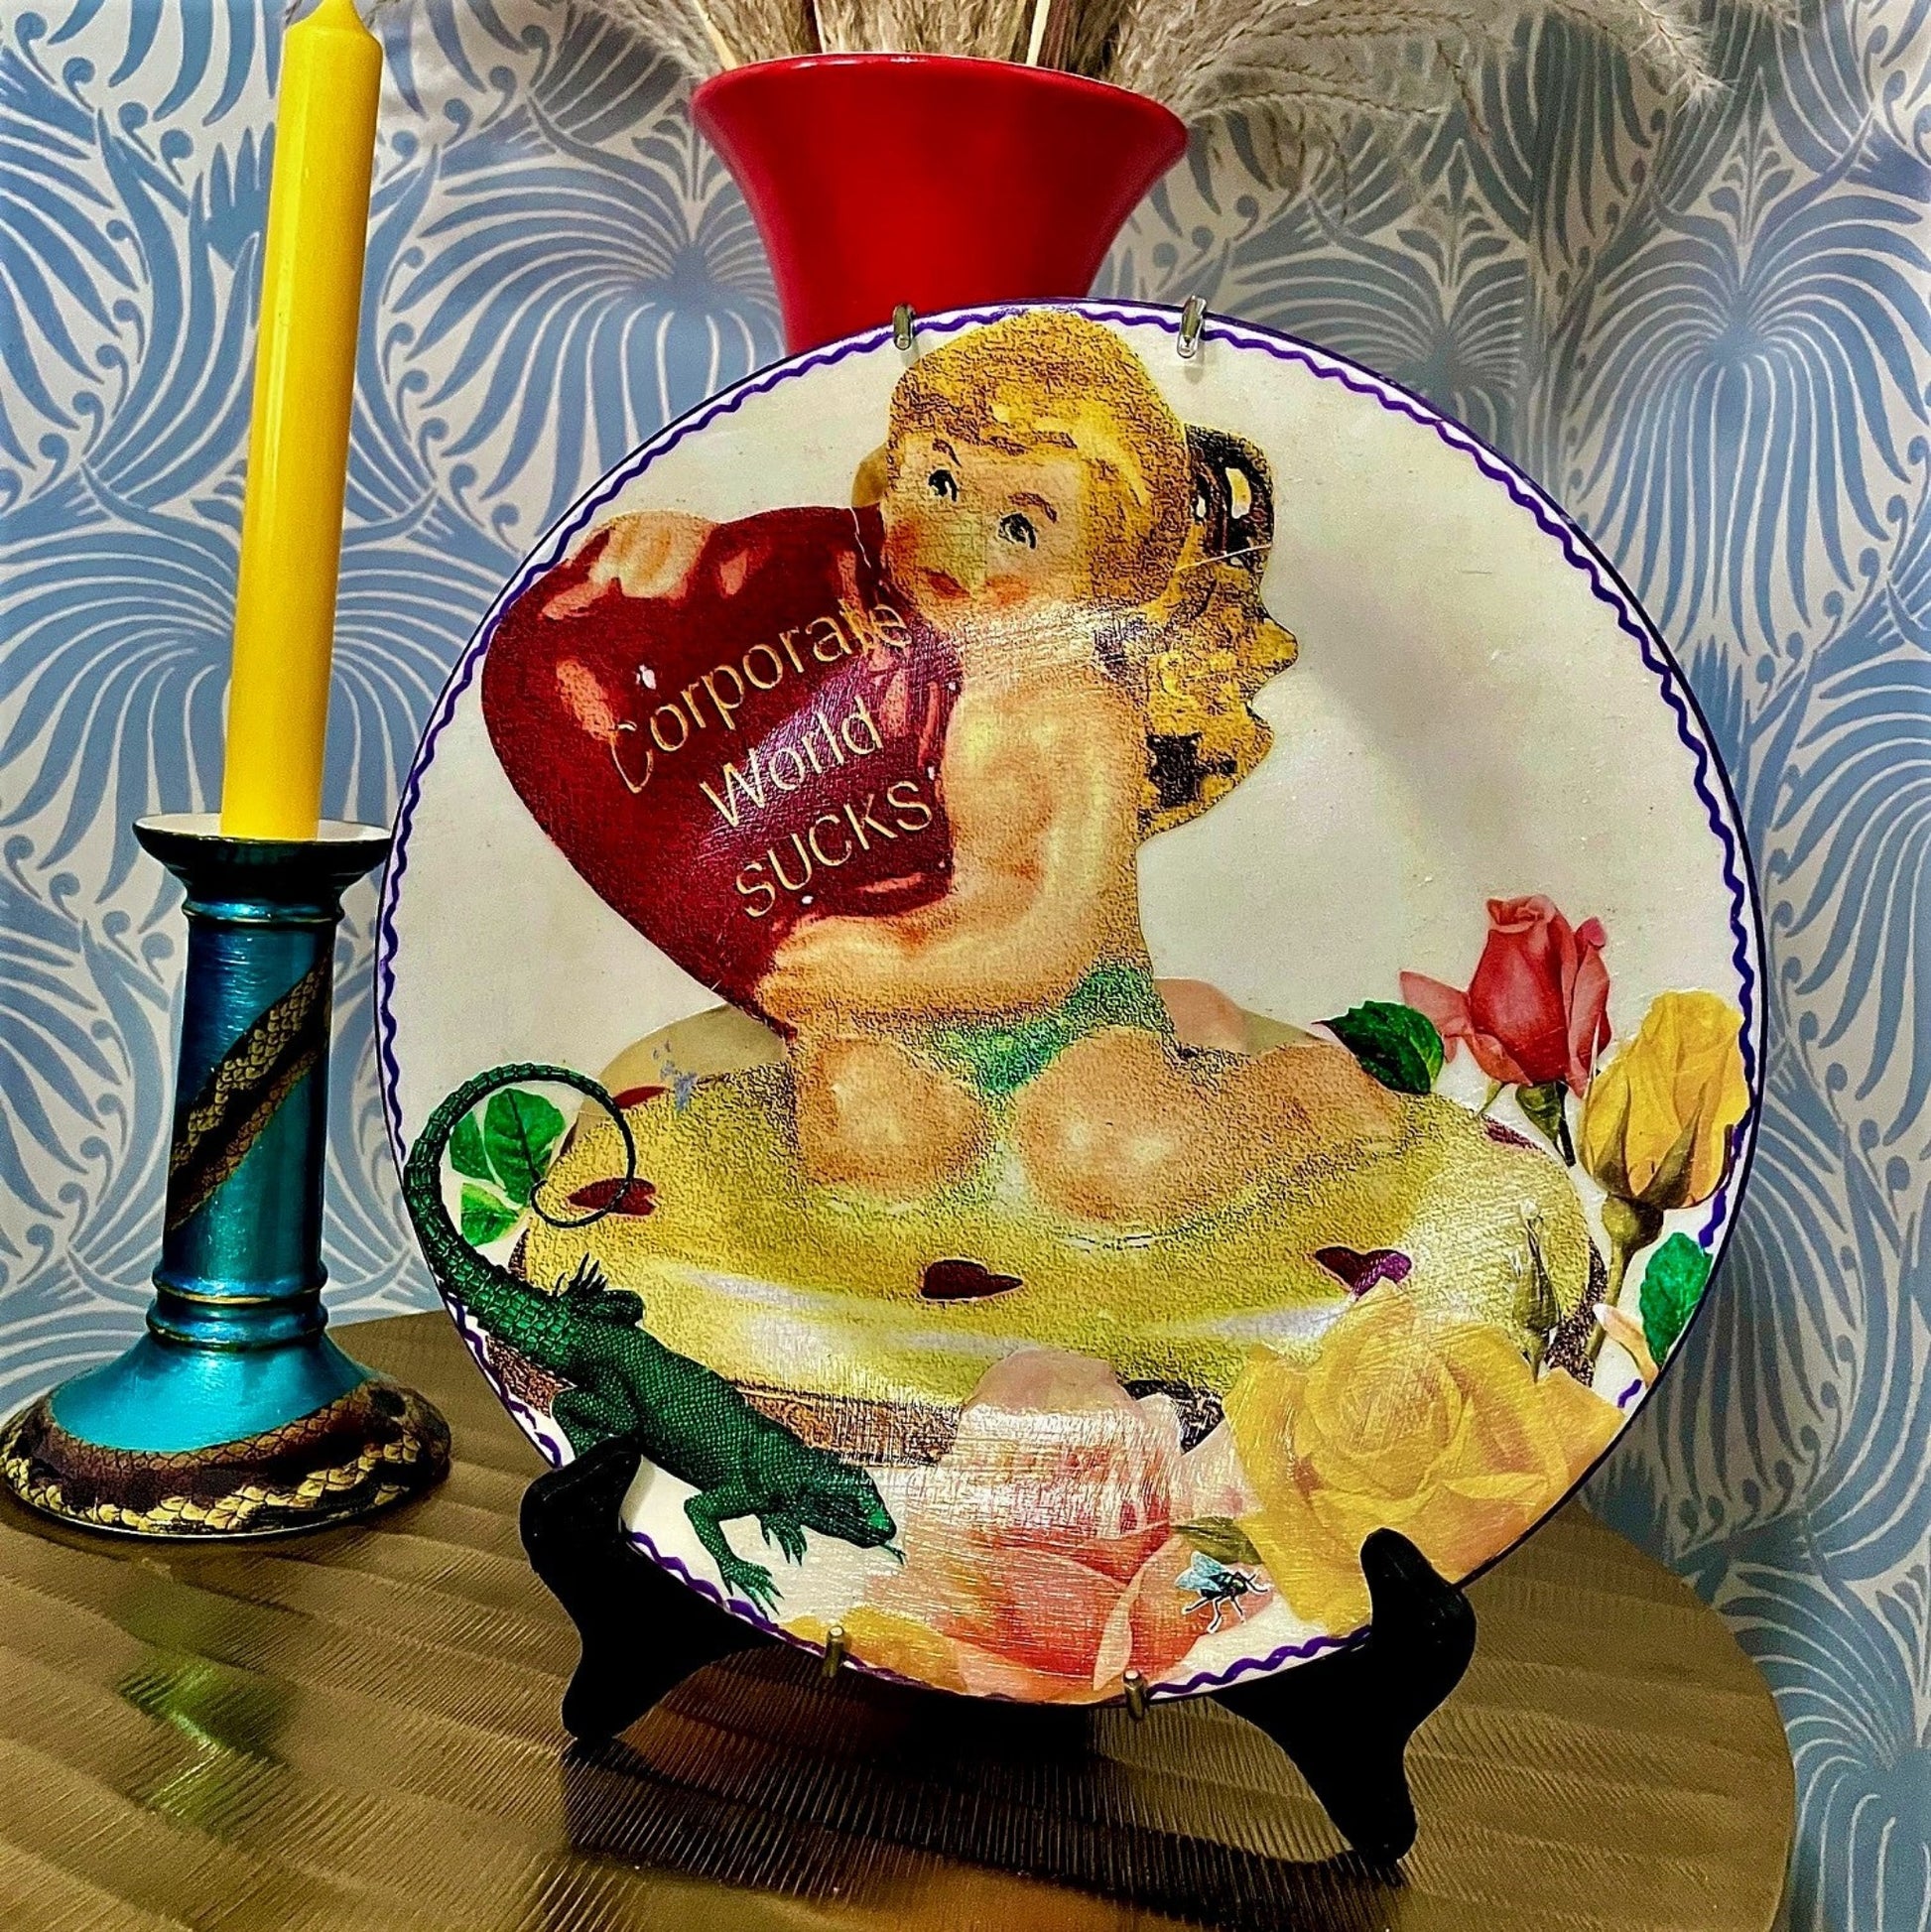 House of Frisson "Corporate World Sucks" Off White Wall Plate Front. Collage artwork featuring a kitsch angel figure holding a heart, among roses, a lizard, and a fly. Plate on a plate stand, resting on a table.